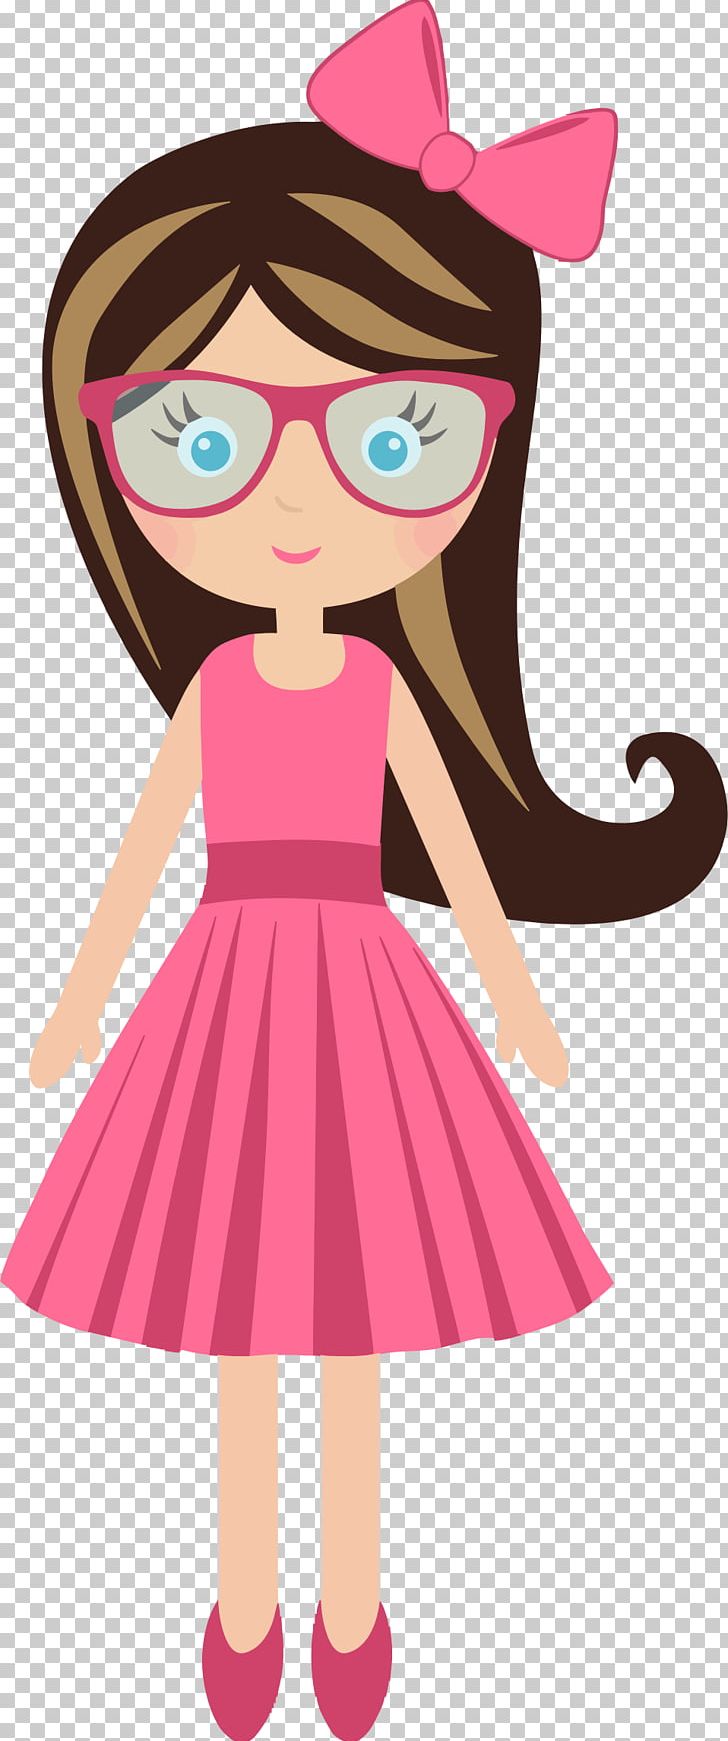 Girl Cartoon Glasses Drawing PNG, Clipart, Black Hair, Brown Hair, Cartoon, Child, Clothing Free PNG Download